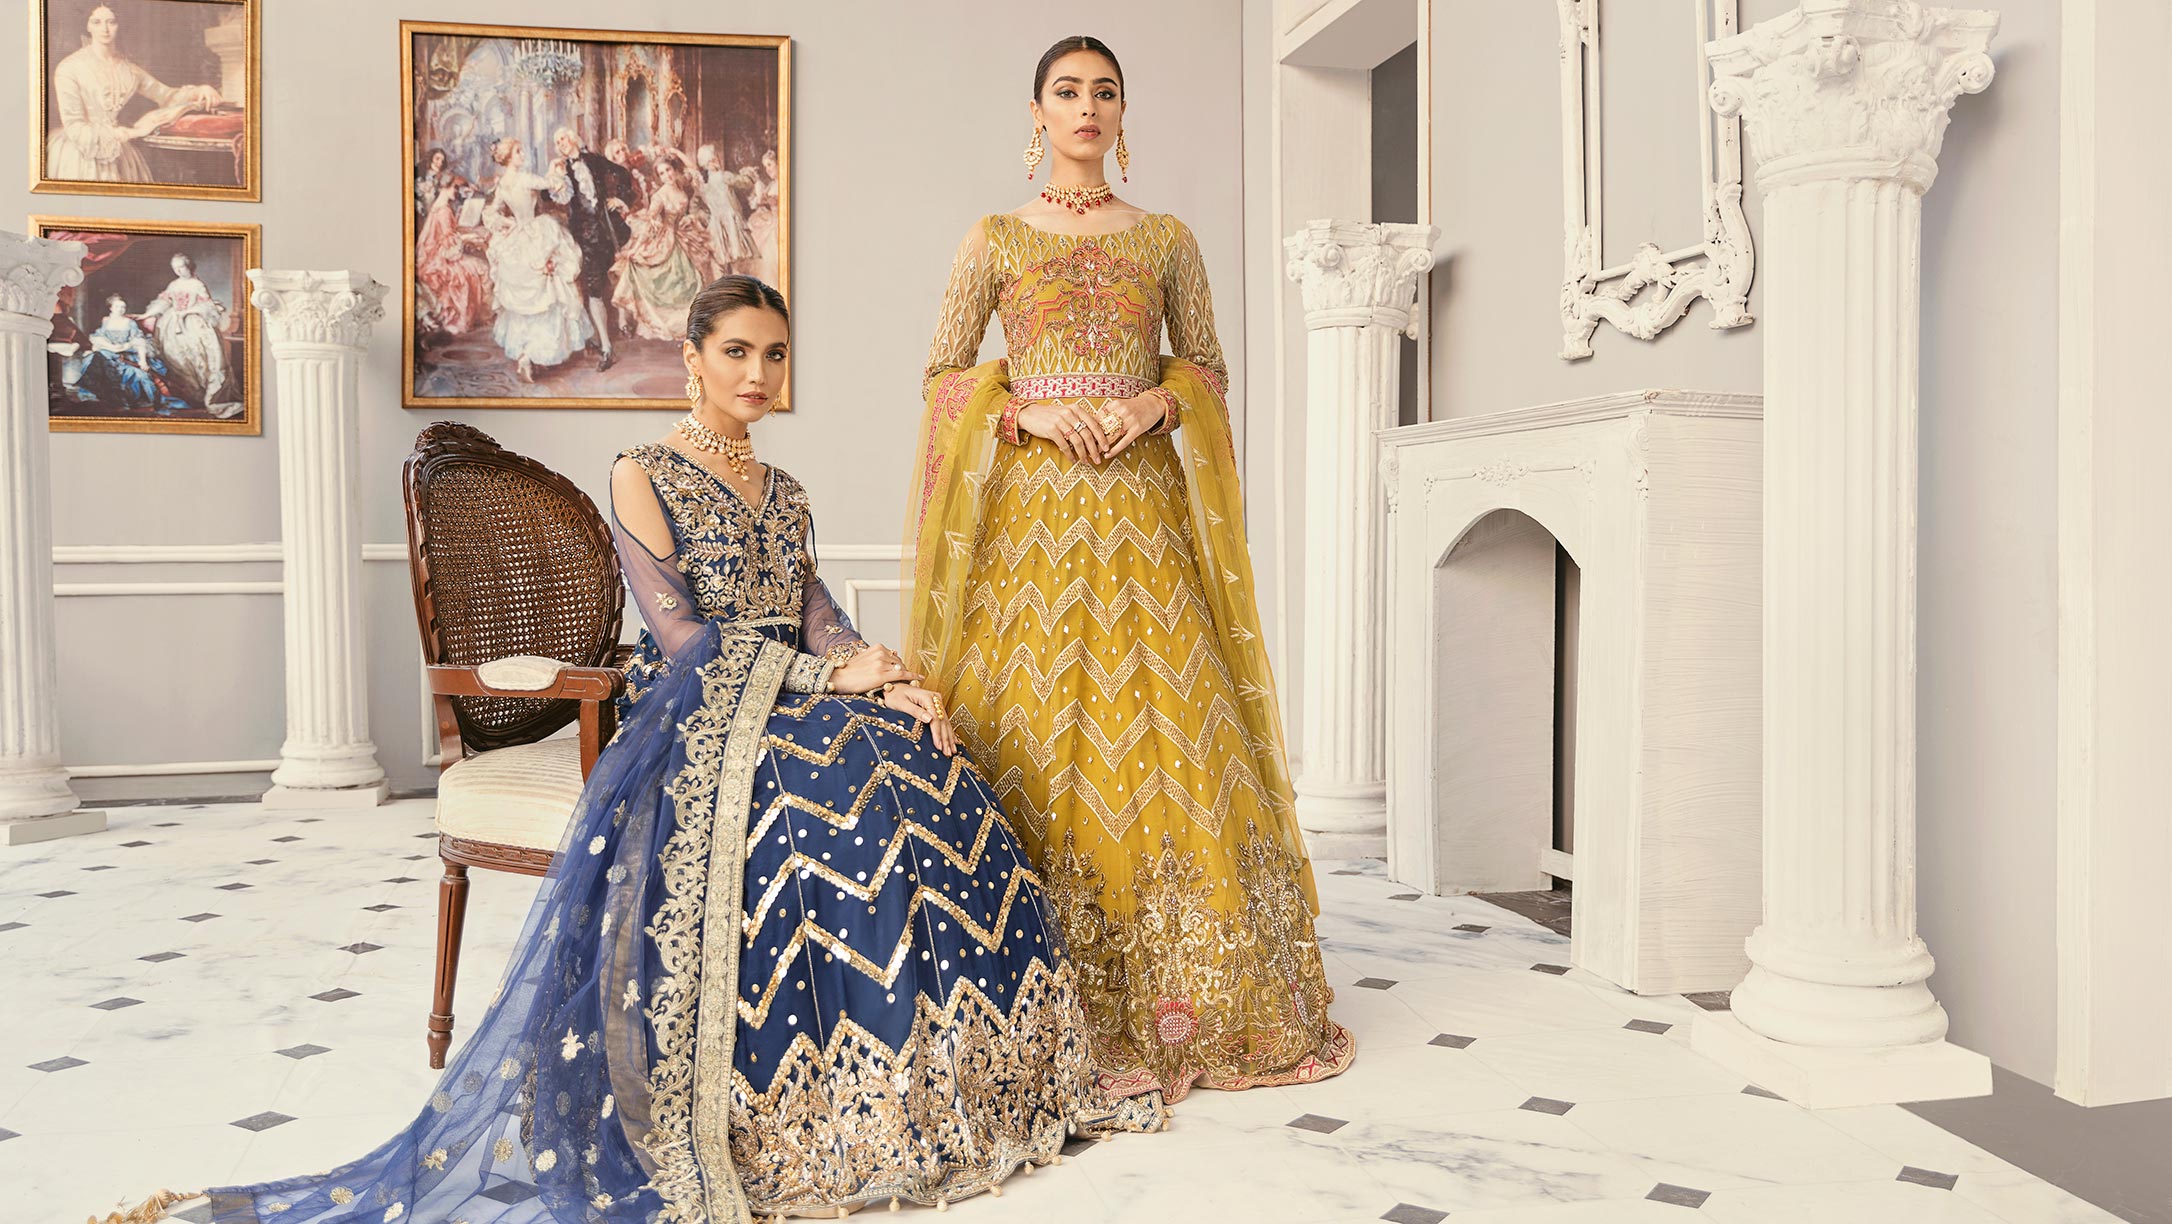 Latest Asian Umbrella Style Dresses & Frocks Designs 2022-23 Collection |  Beautiful frock design, Beautiful frocks, Frock design